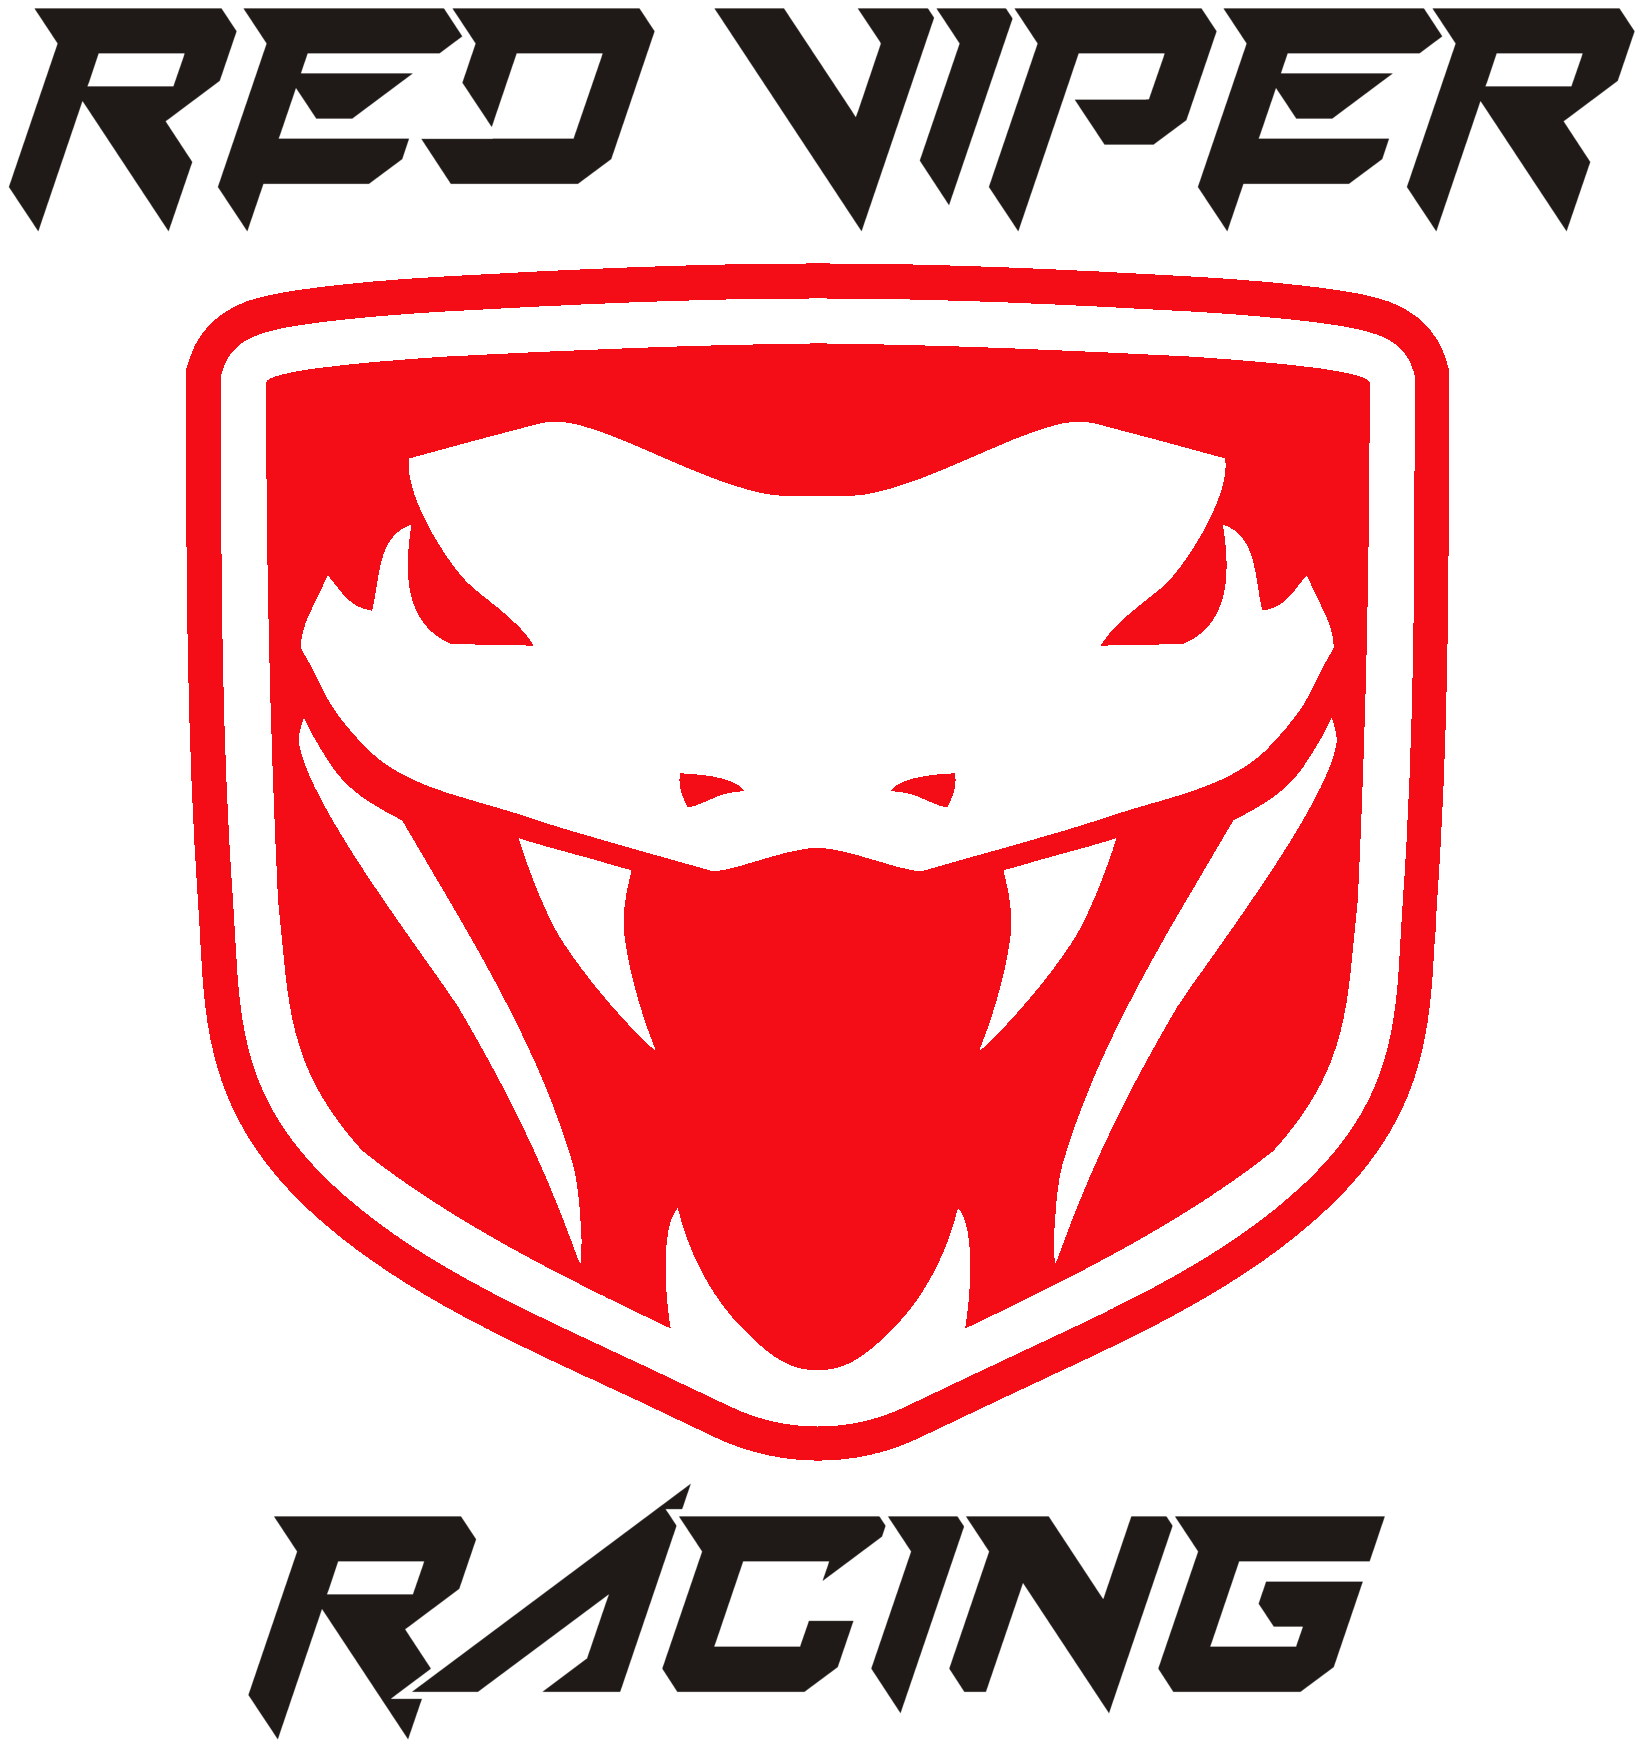 Red Viper Logo - Red Viper Racing | ASCA League Wiki | FANDOM powered by Wikia